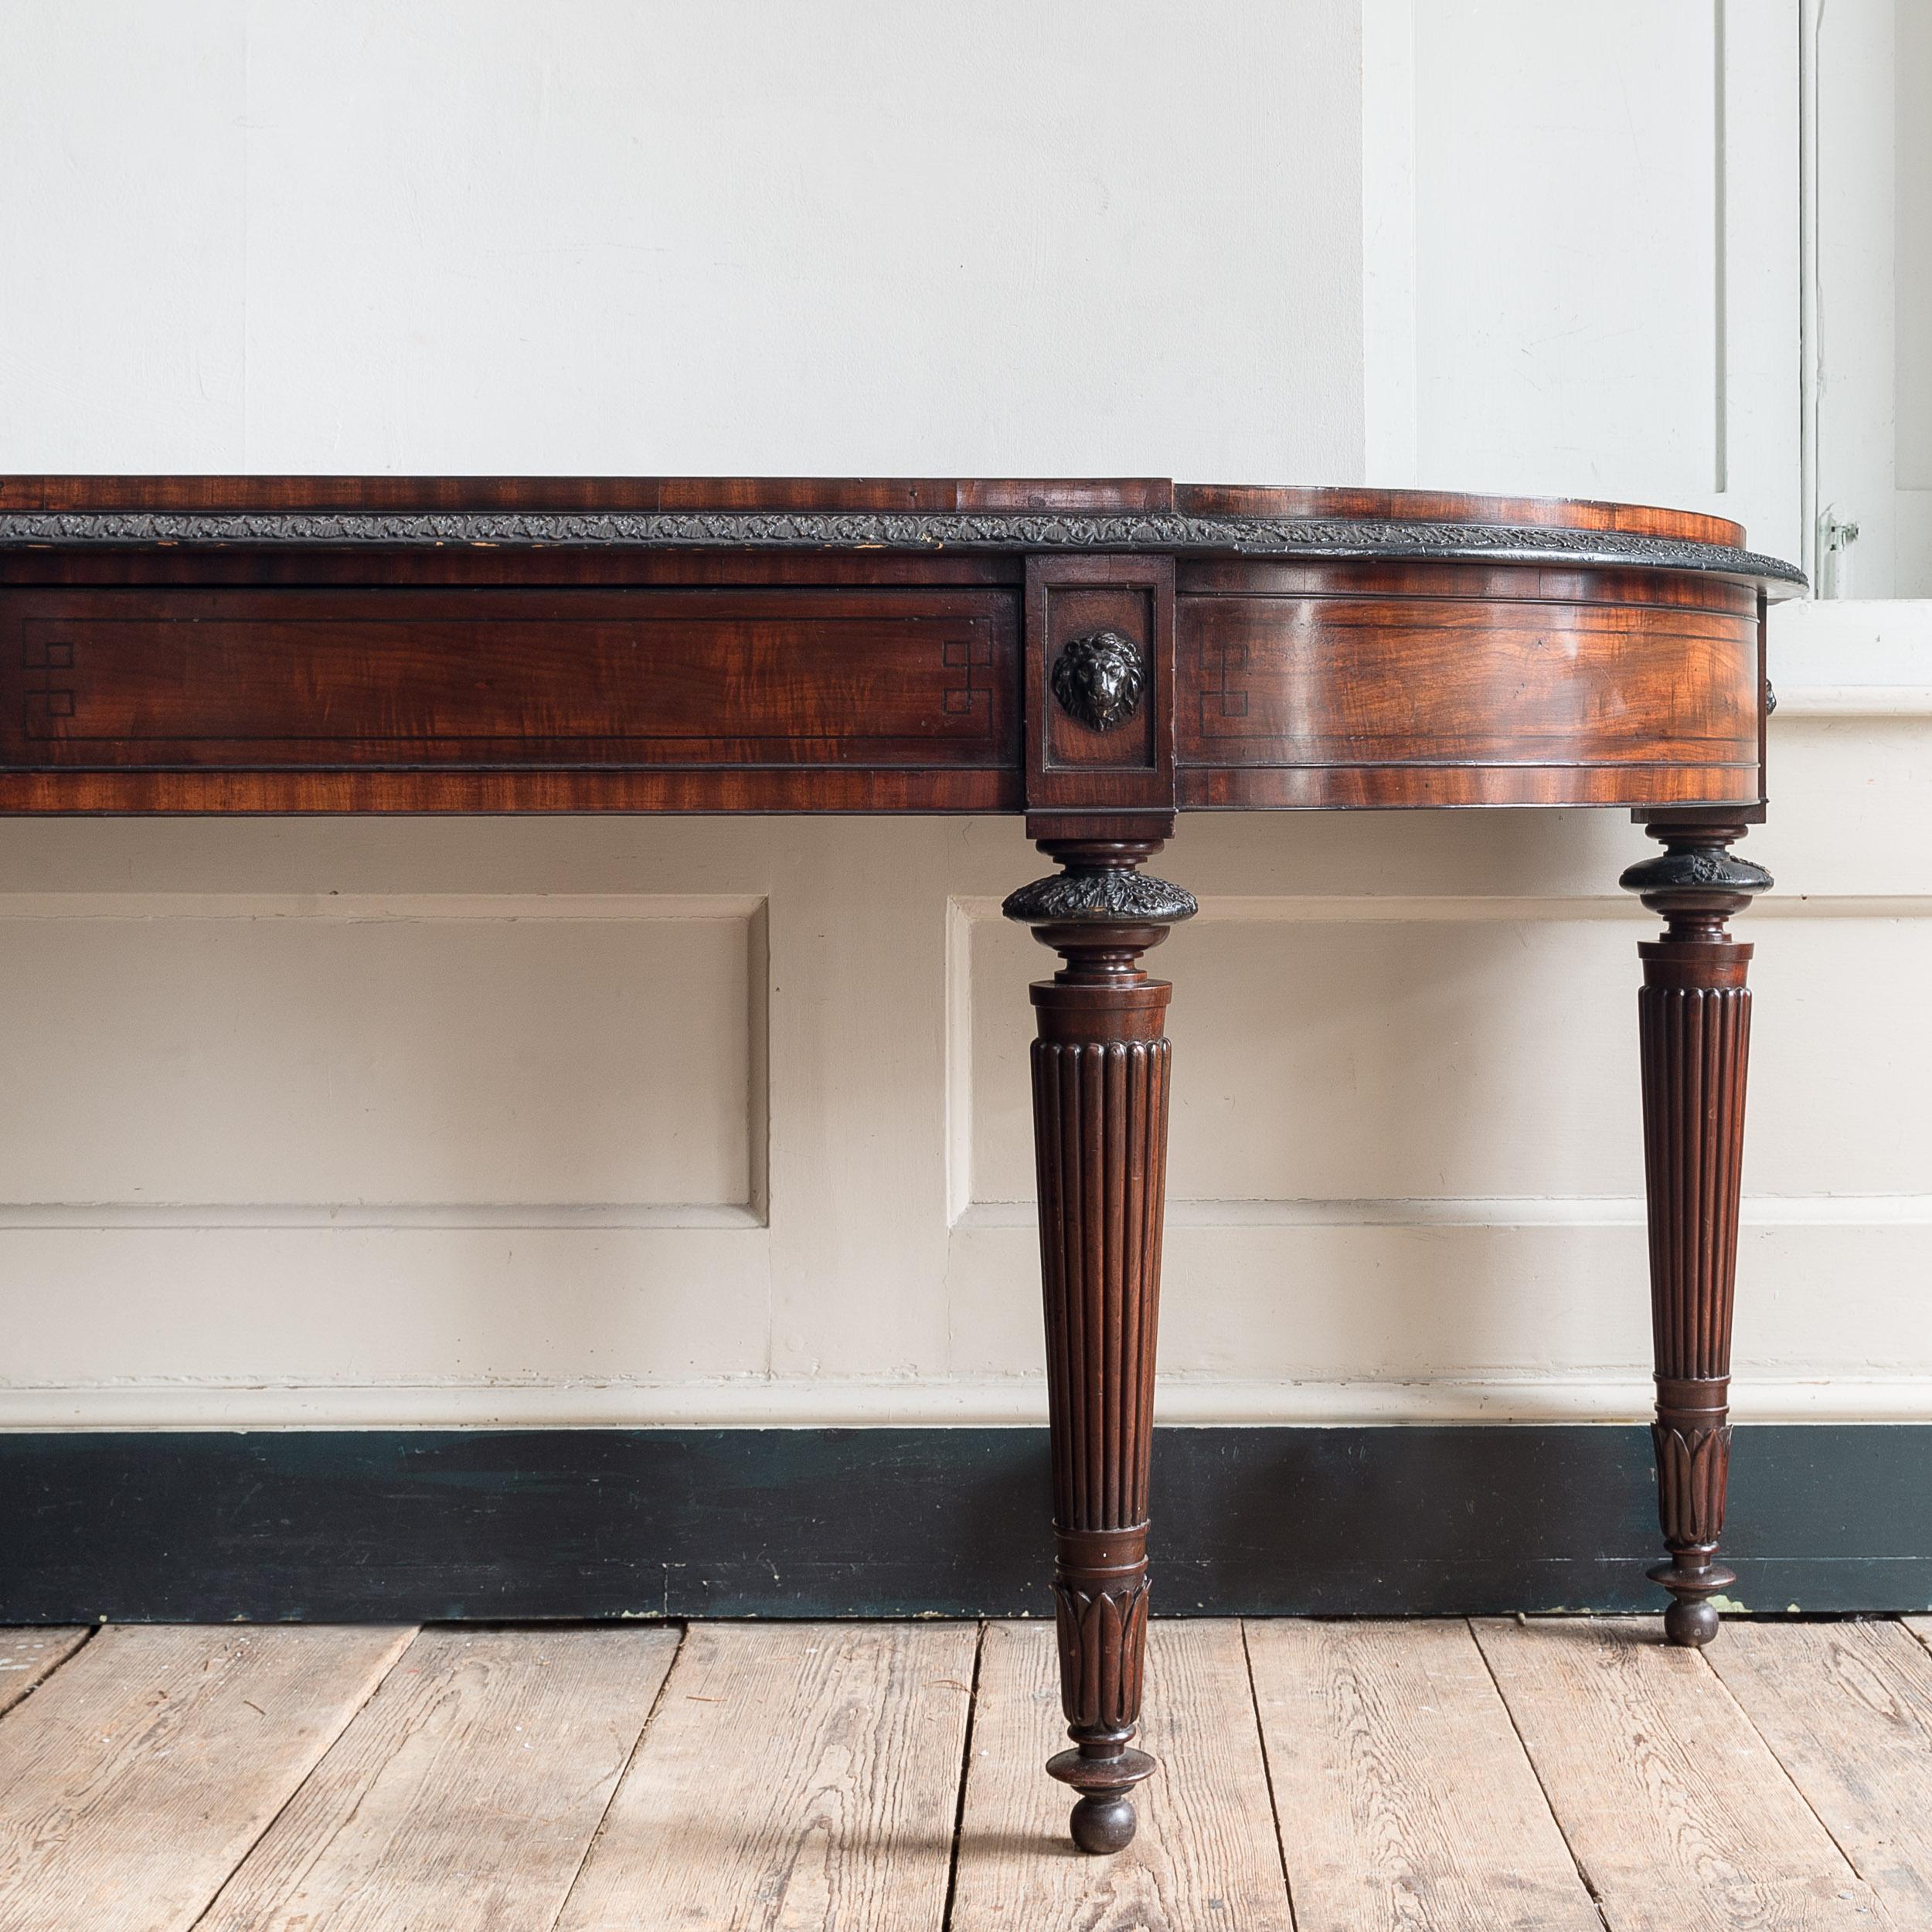 An early nineteenth century mahogany serving table, in the manner of George Oakley, with well figured d-shaped top, the single-step and ovolo moulded lip embellished with ebonised acanthus moulding, the frieze with ebonised line inlay in the Grecian